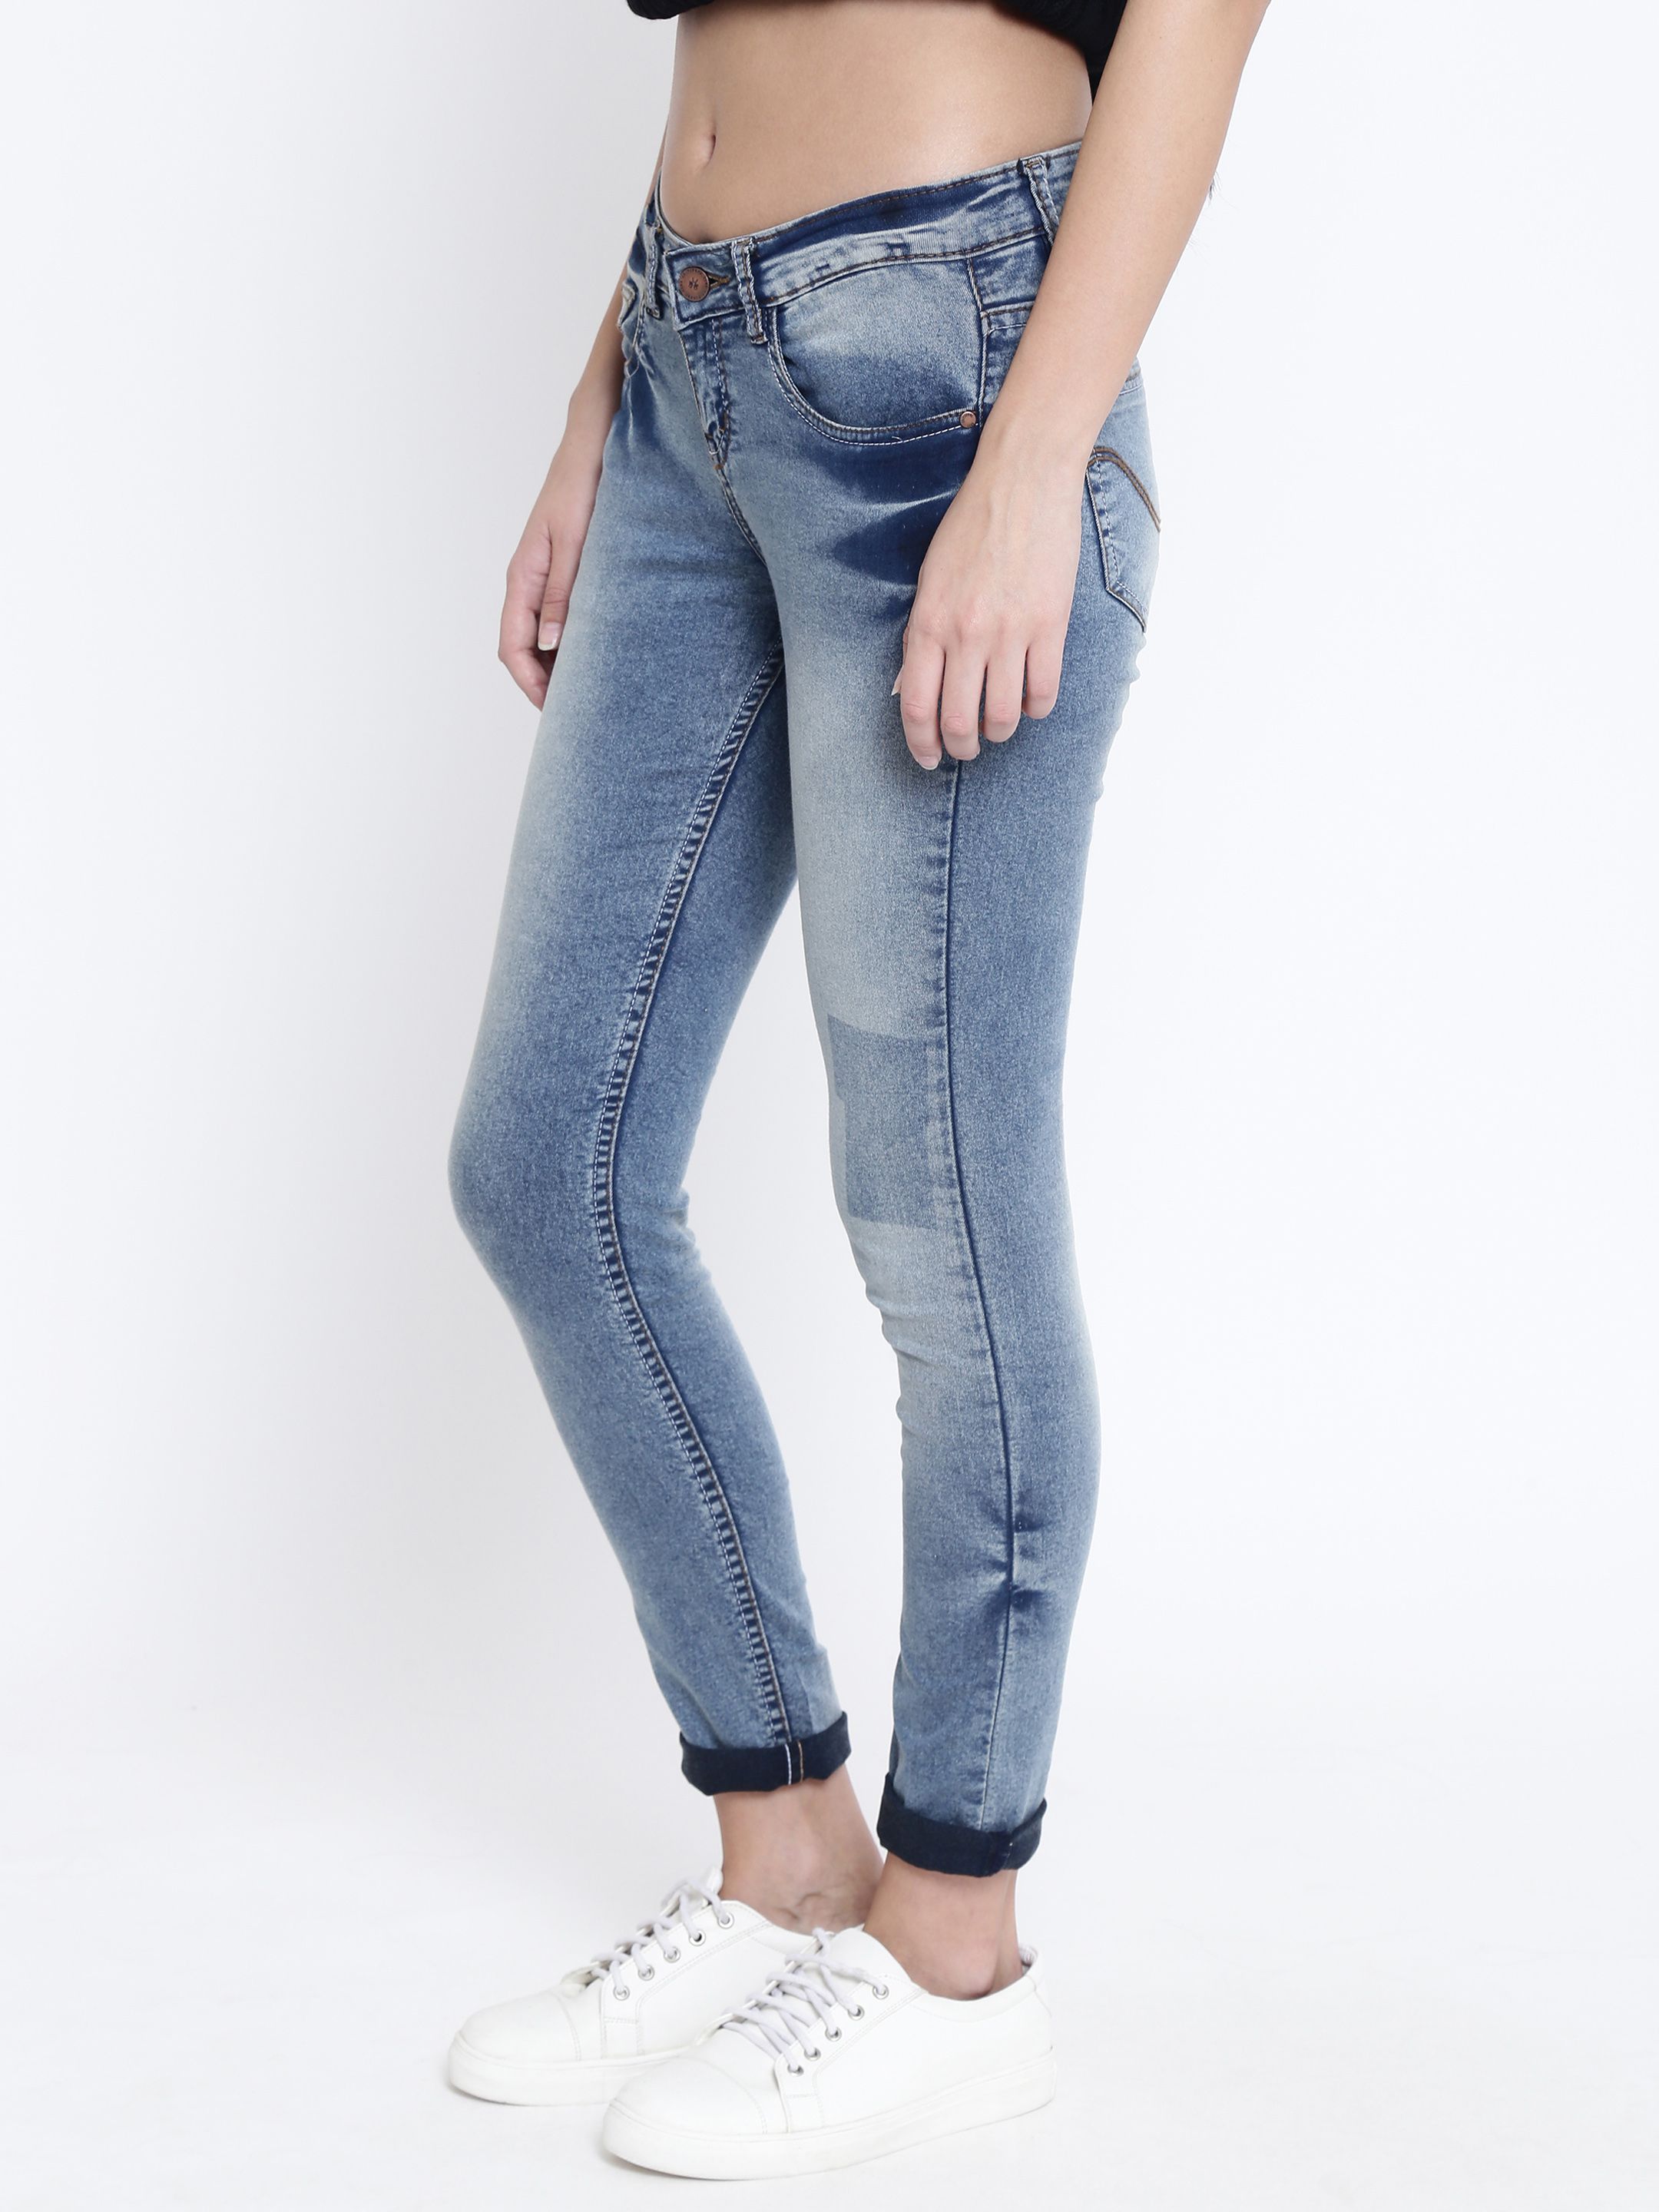 Buy Crimsoune Club Cotton Jeans - Blue Online at Best Prices in India ...